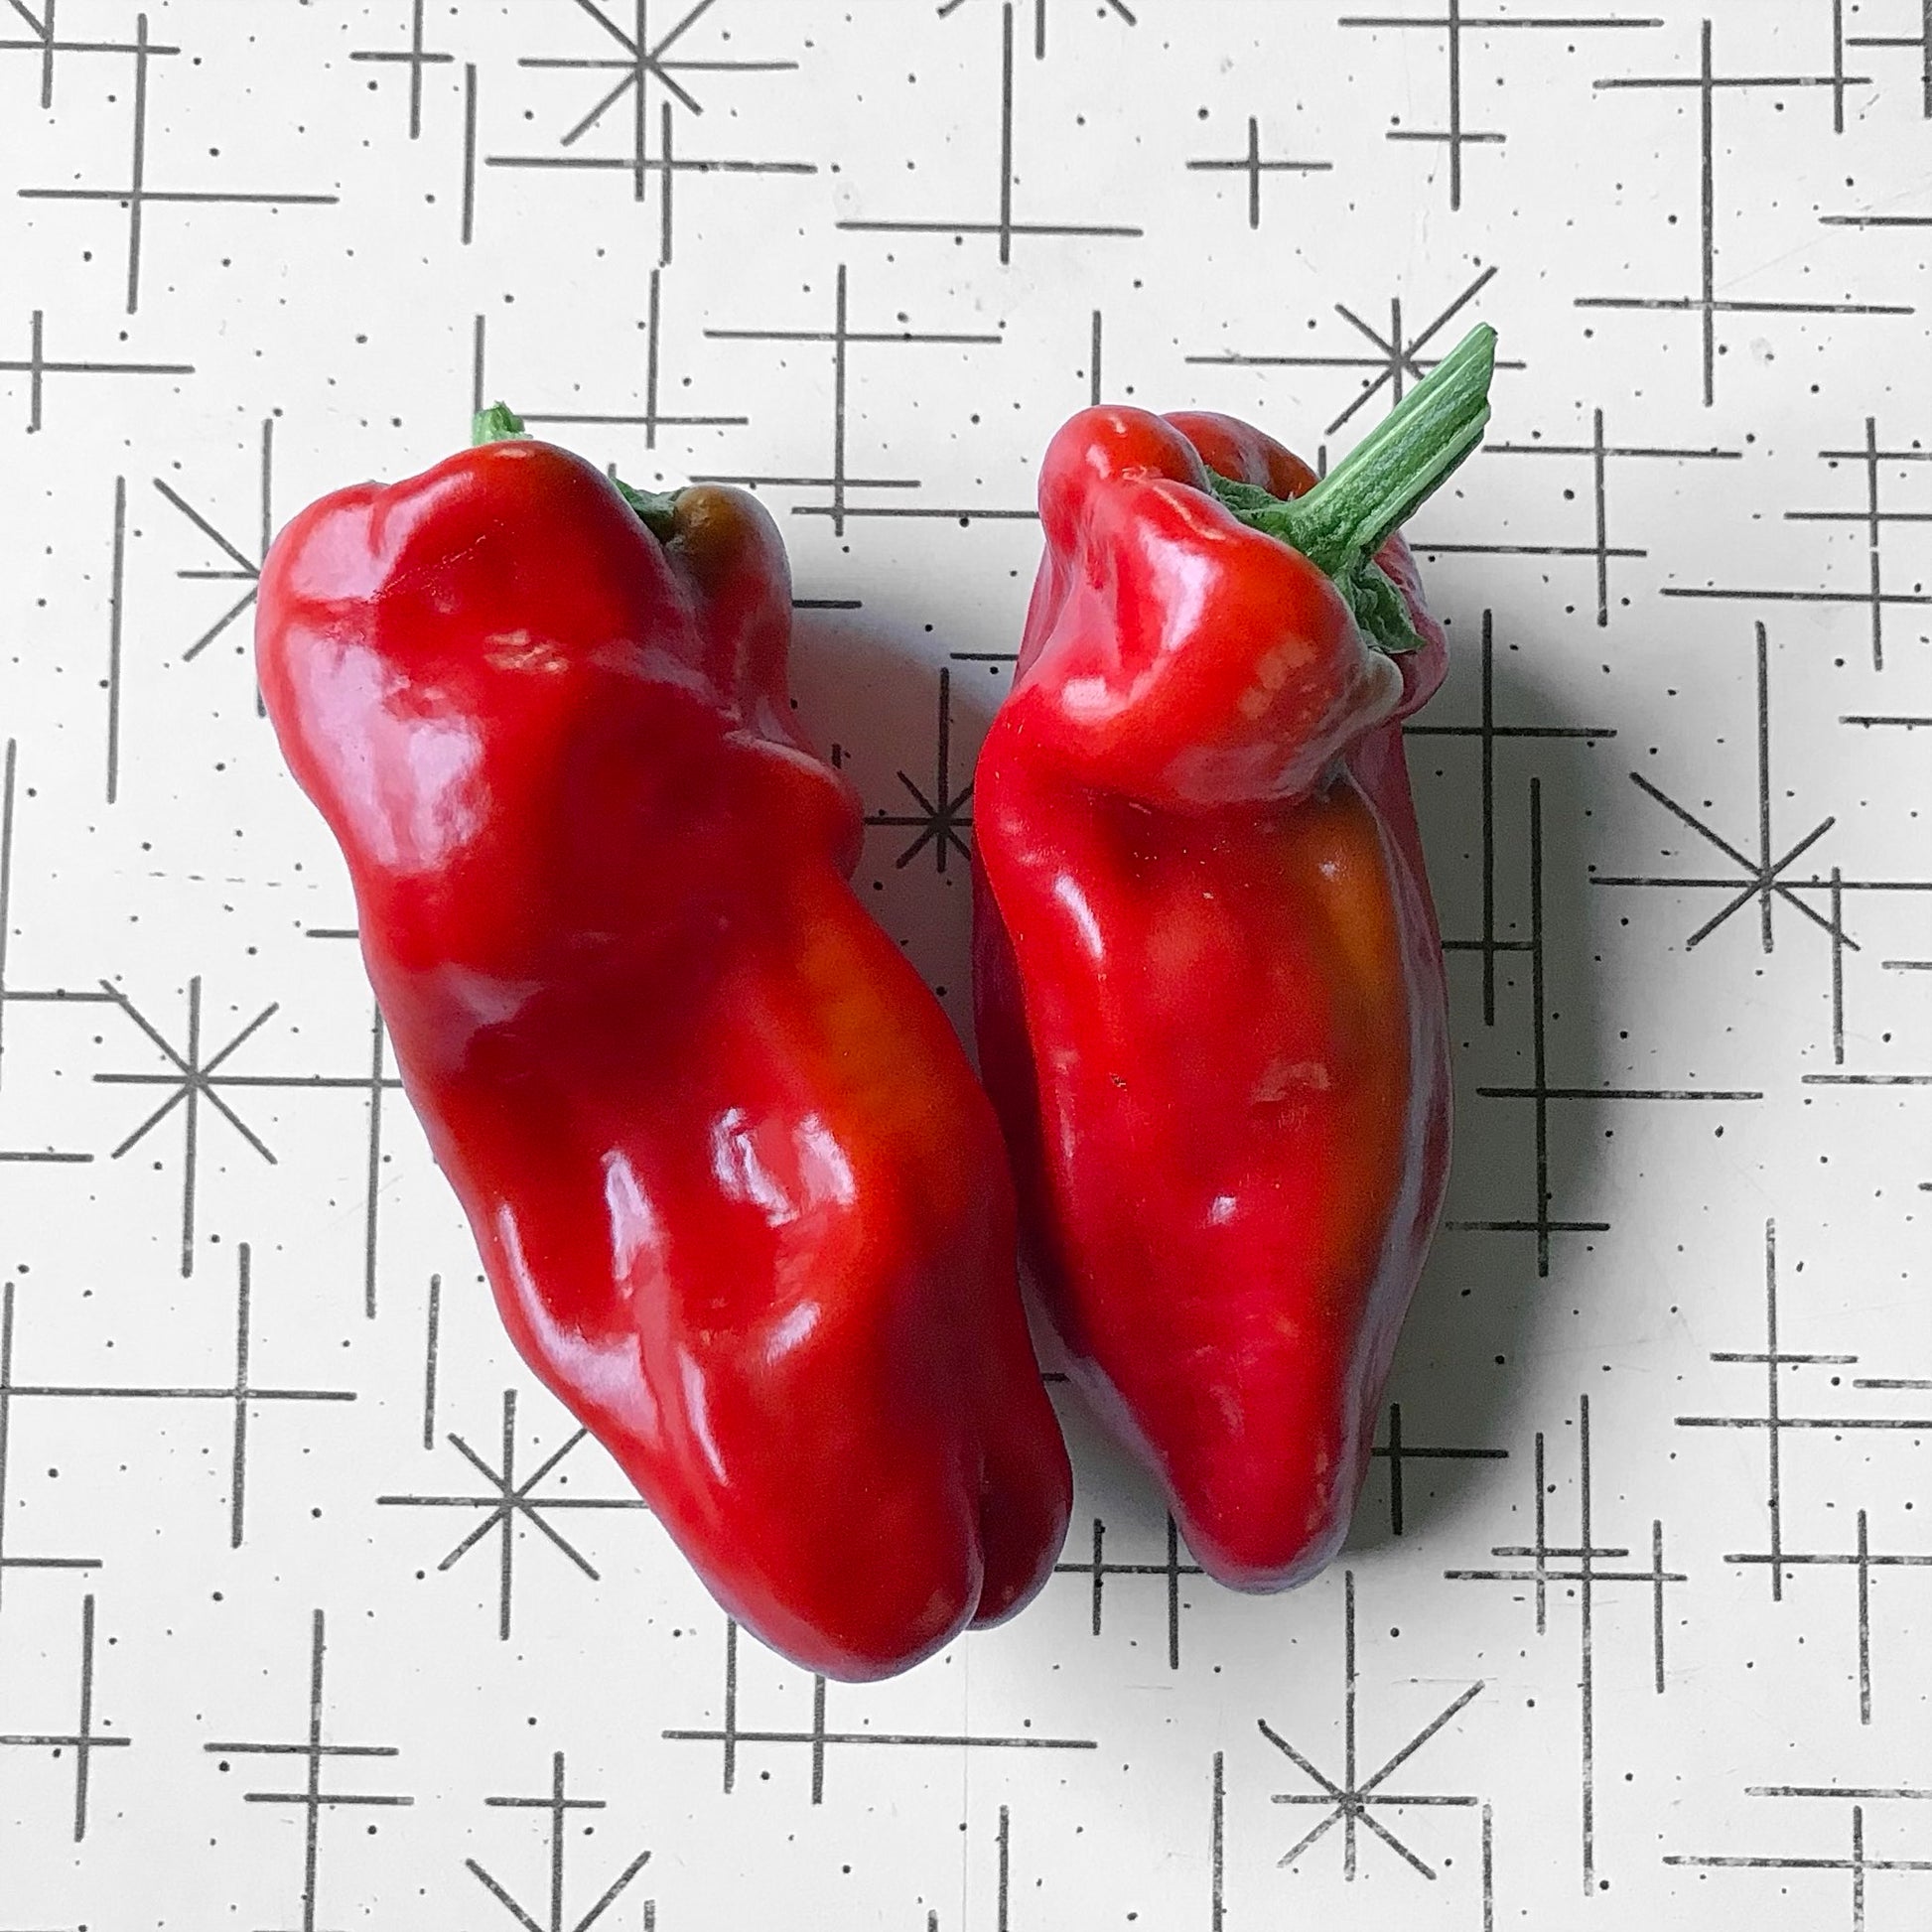 Two perfectly ripe neapolitan peppers on a table.